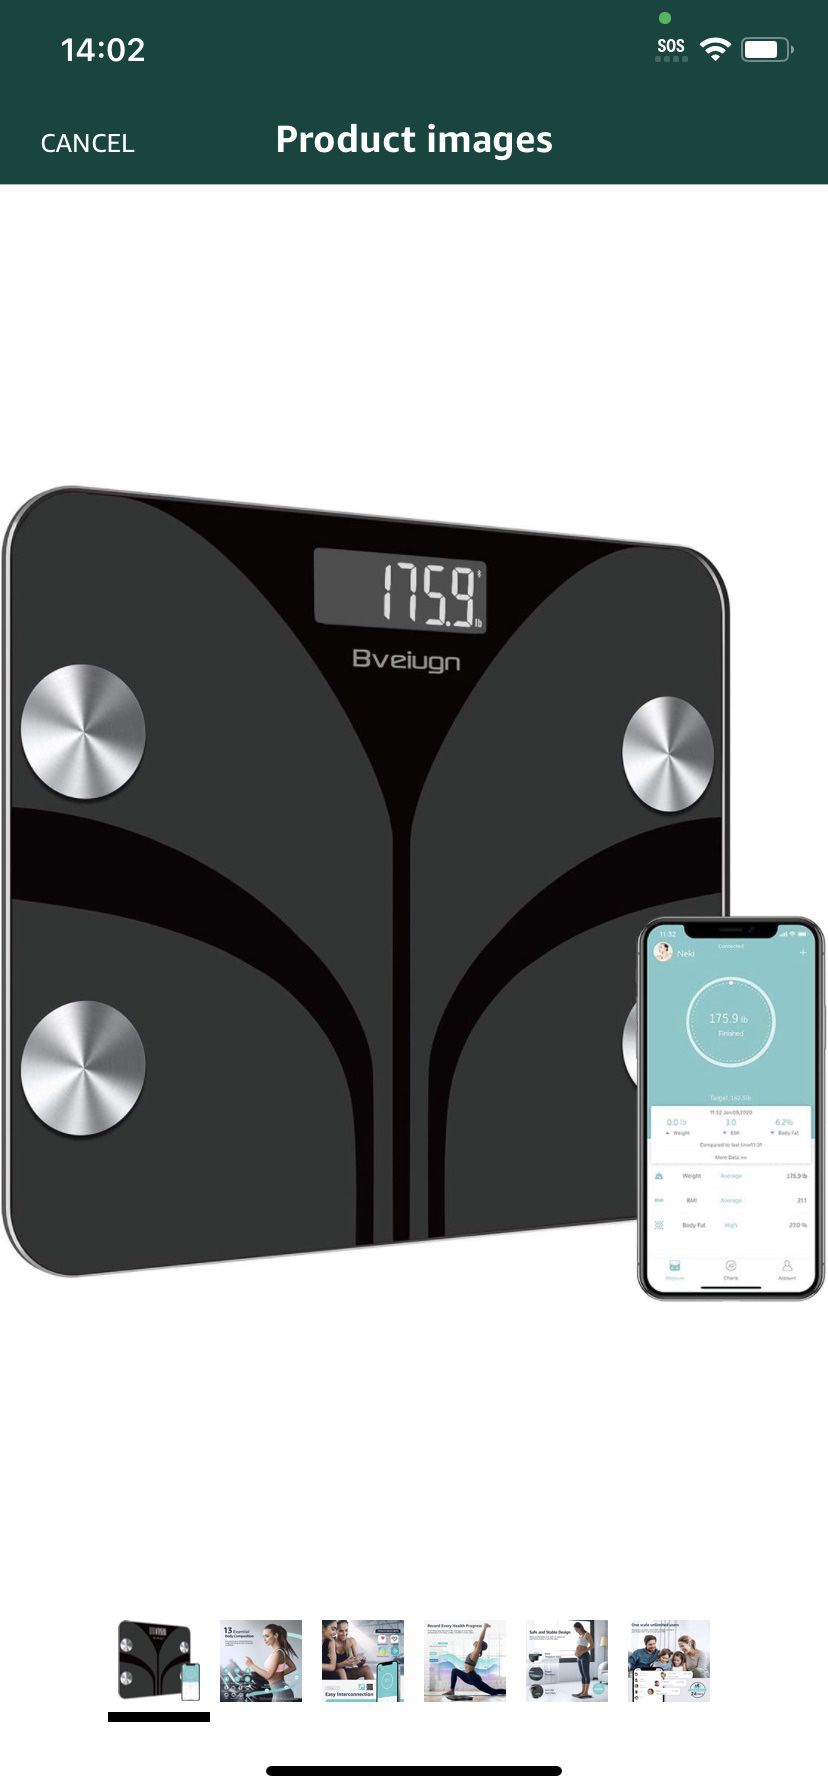 Scale for Body Weight, Bveiugn Digital Bathroom Smart Scale LED Display, 13 Body Composition Analyzer Sync Weight Scale BMI Health Monitor Sync Apps 4